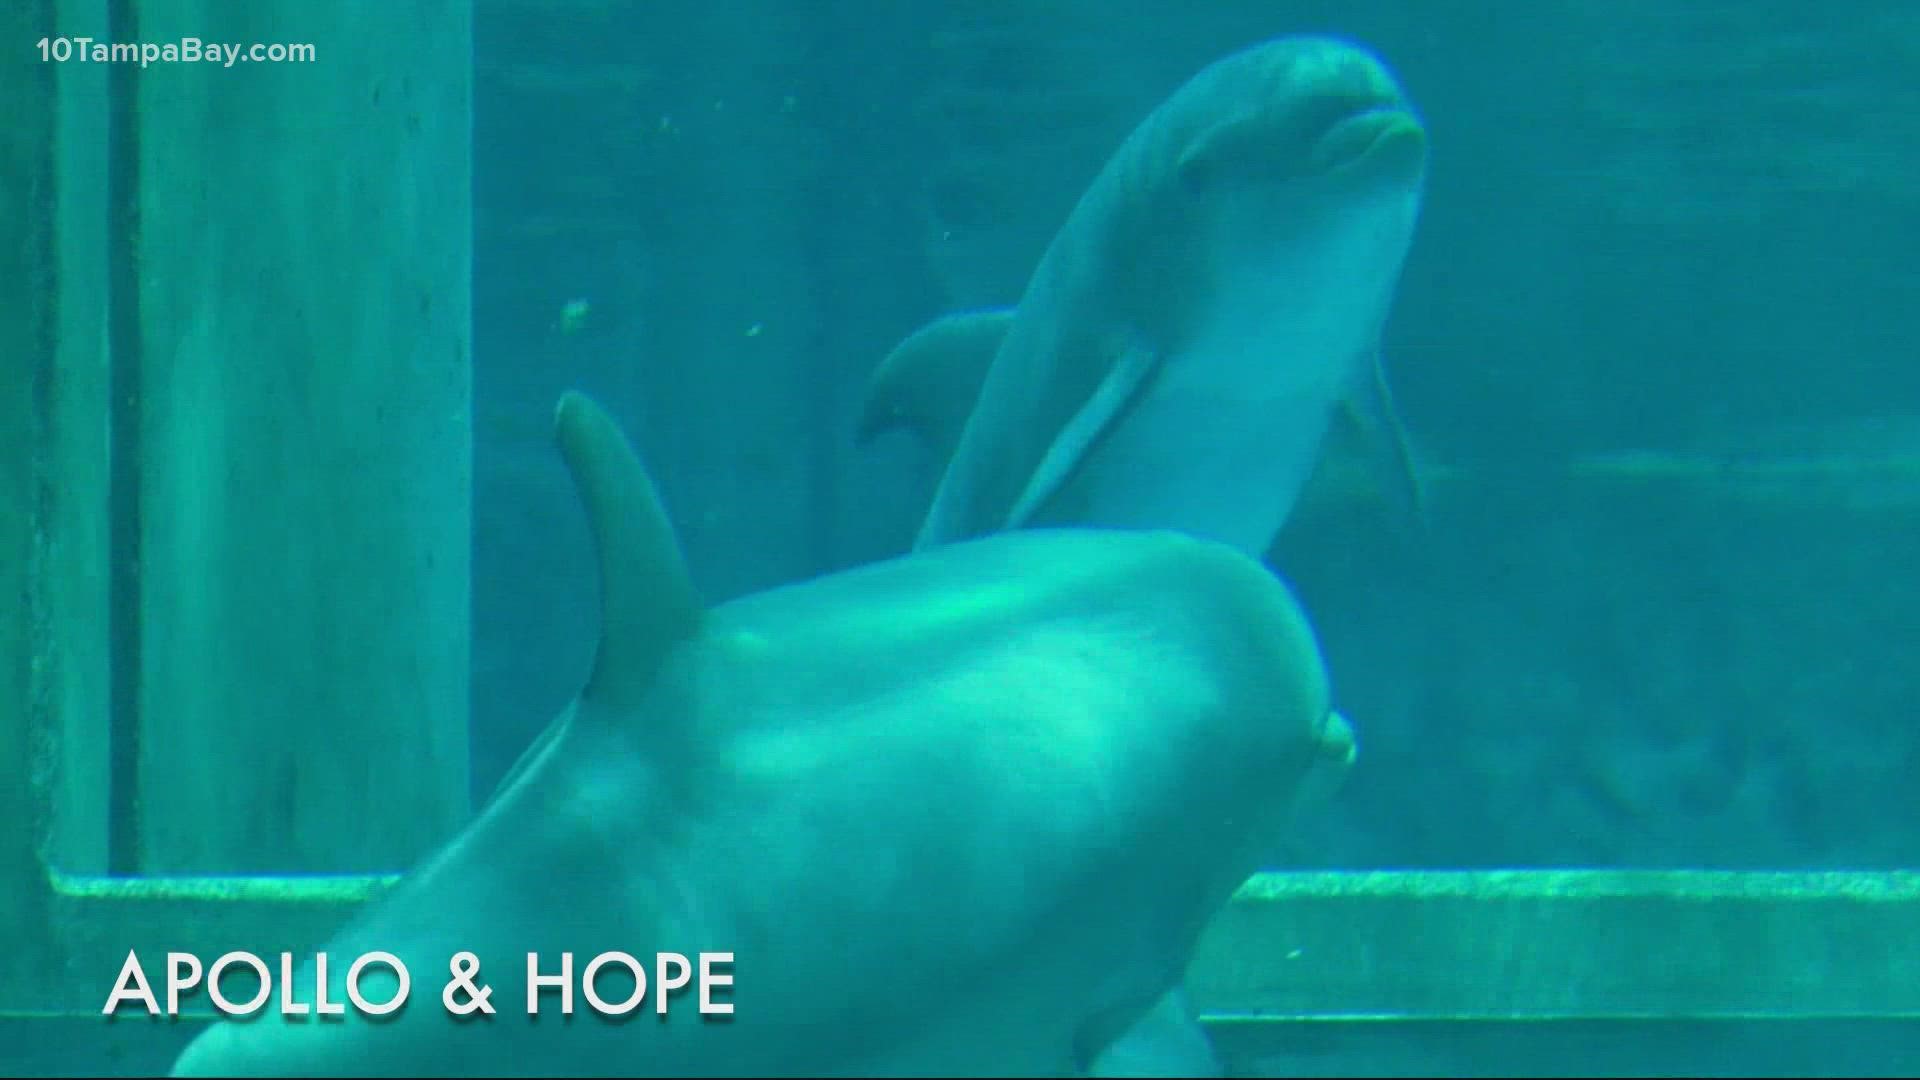 The trio was able to swim in the same pool after Apollo's acclimation period.